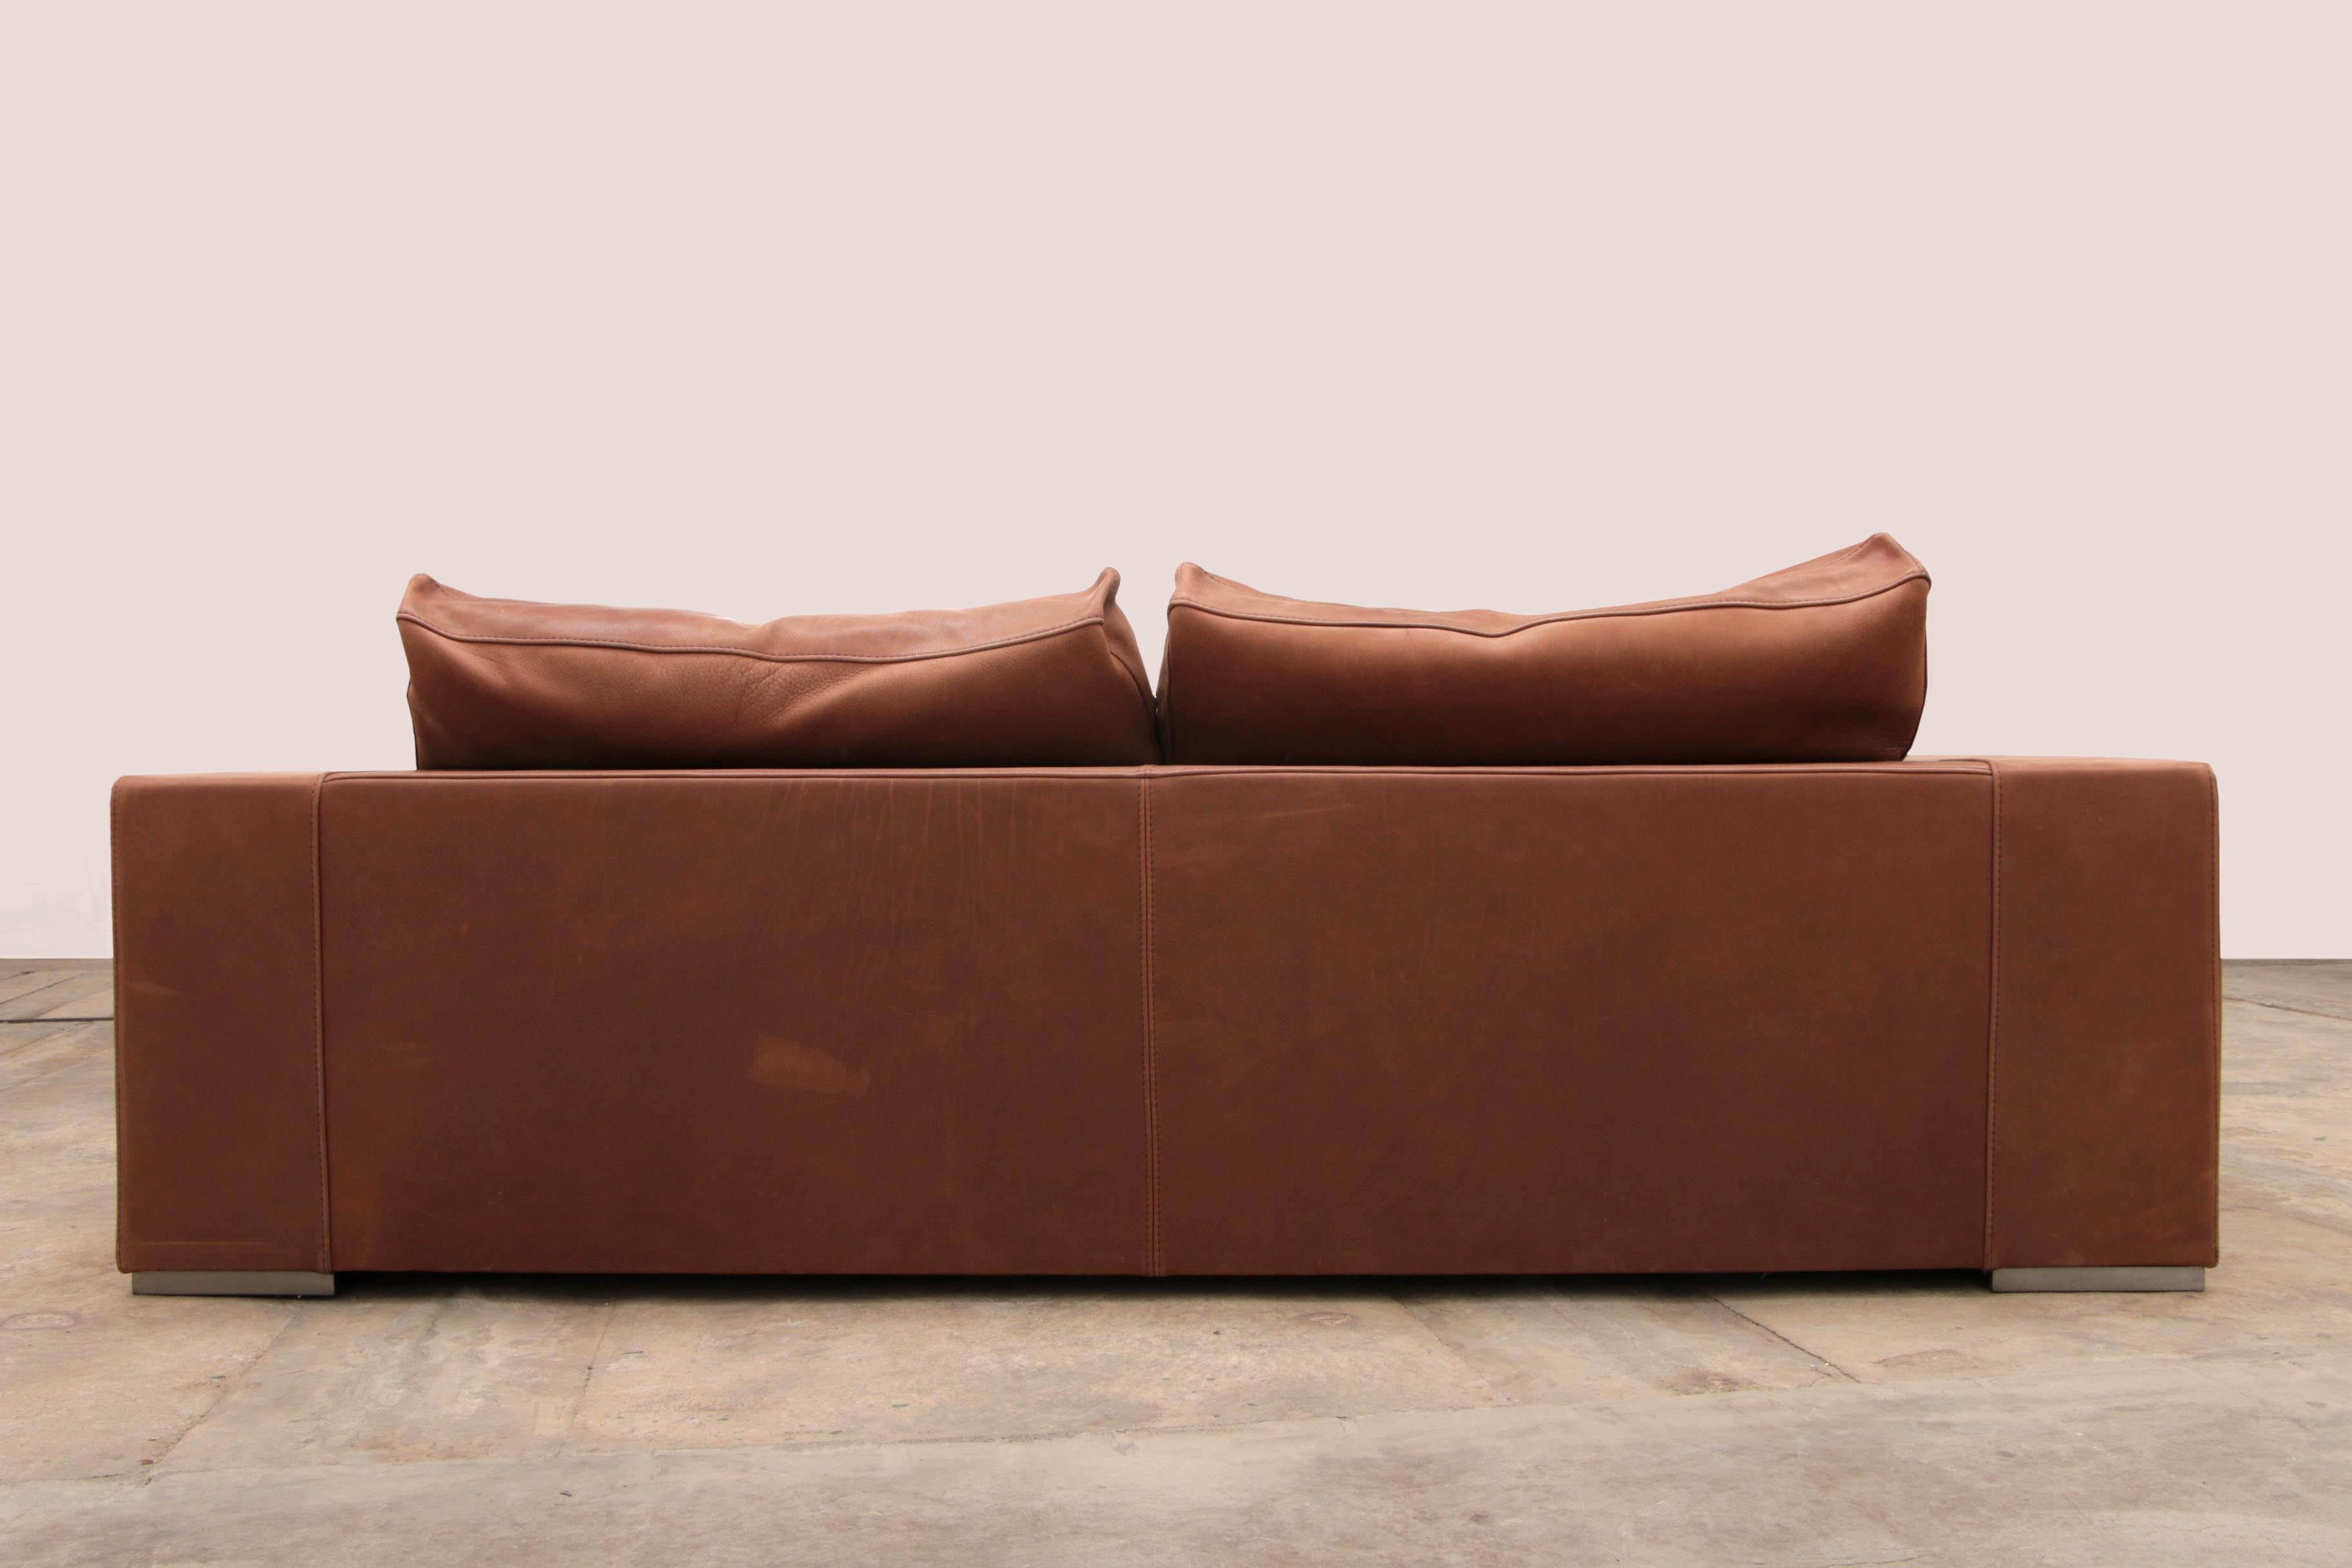 Leather Vintage Sofa Gognac Color Model Budapest Design by Paola Navone by Baxter For Sale